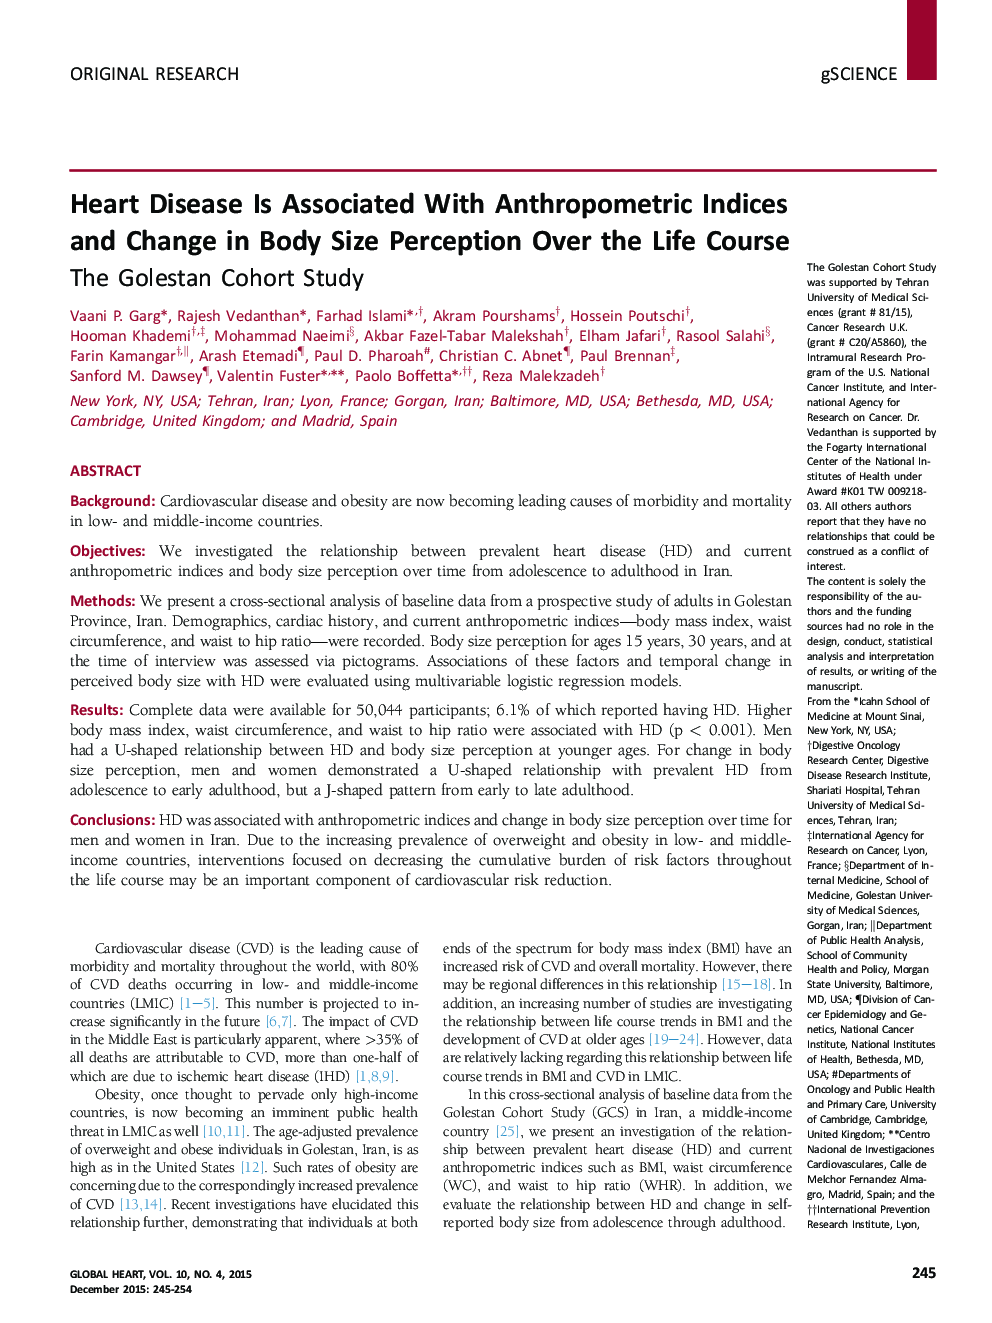 Heart Disease Is Associated With Anthropometric Indices and Change in Body Size Perception Over the Life Course: The Golestan Cohort Study